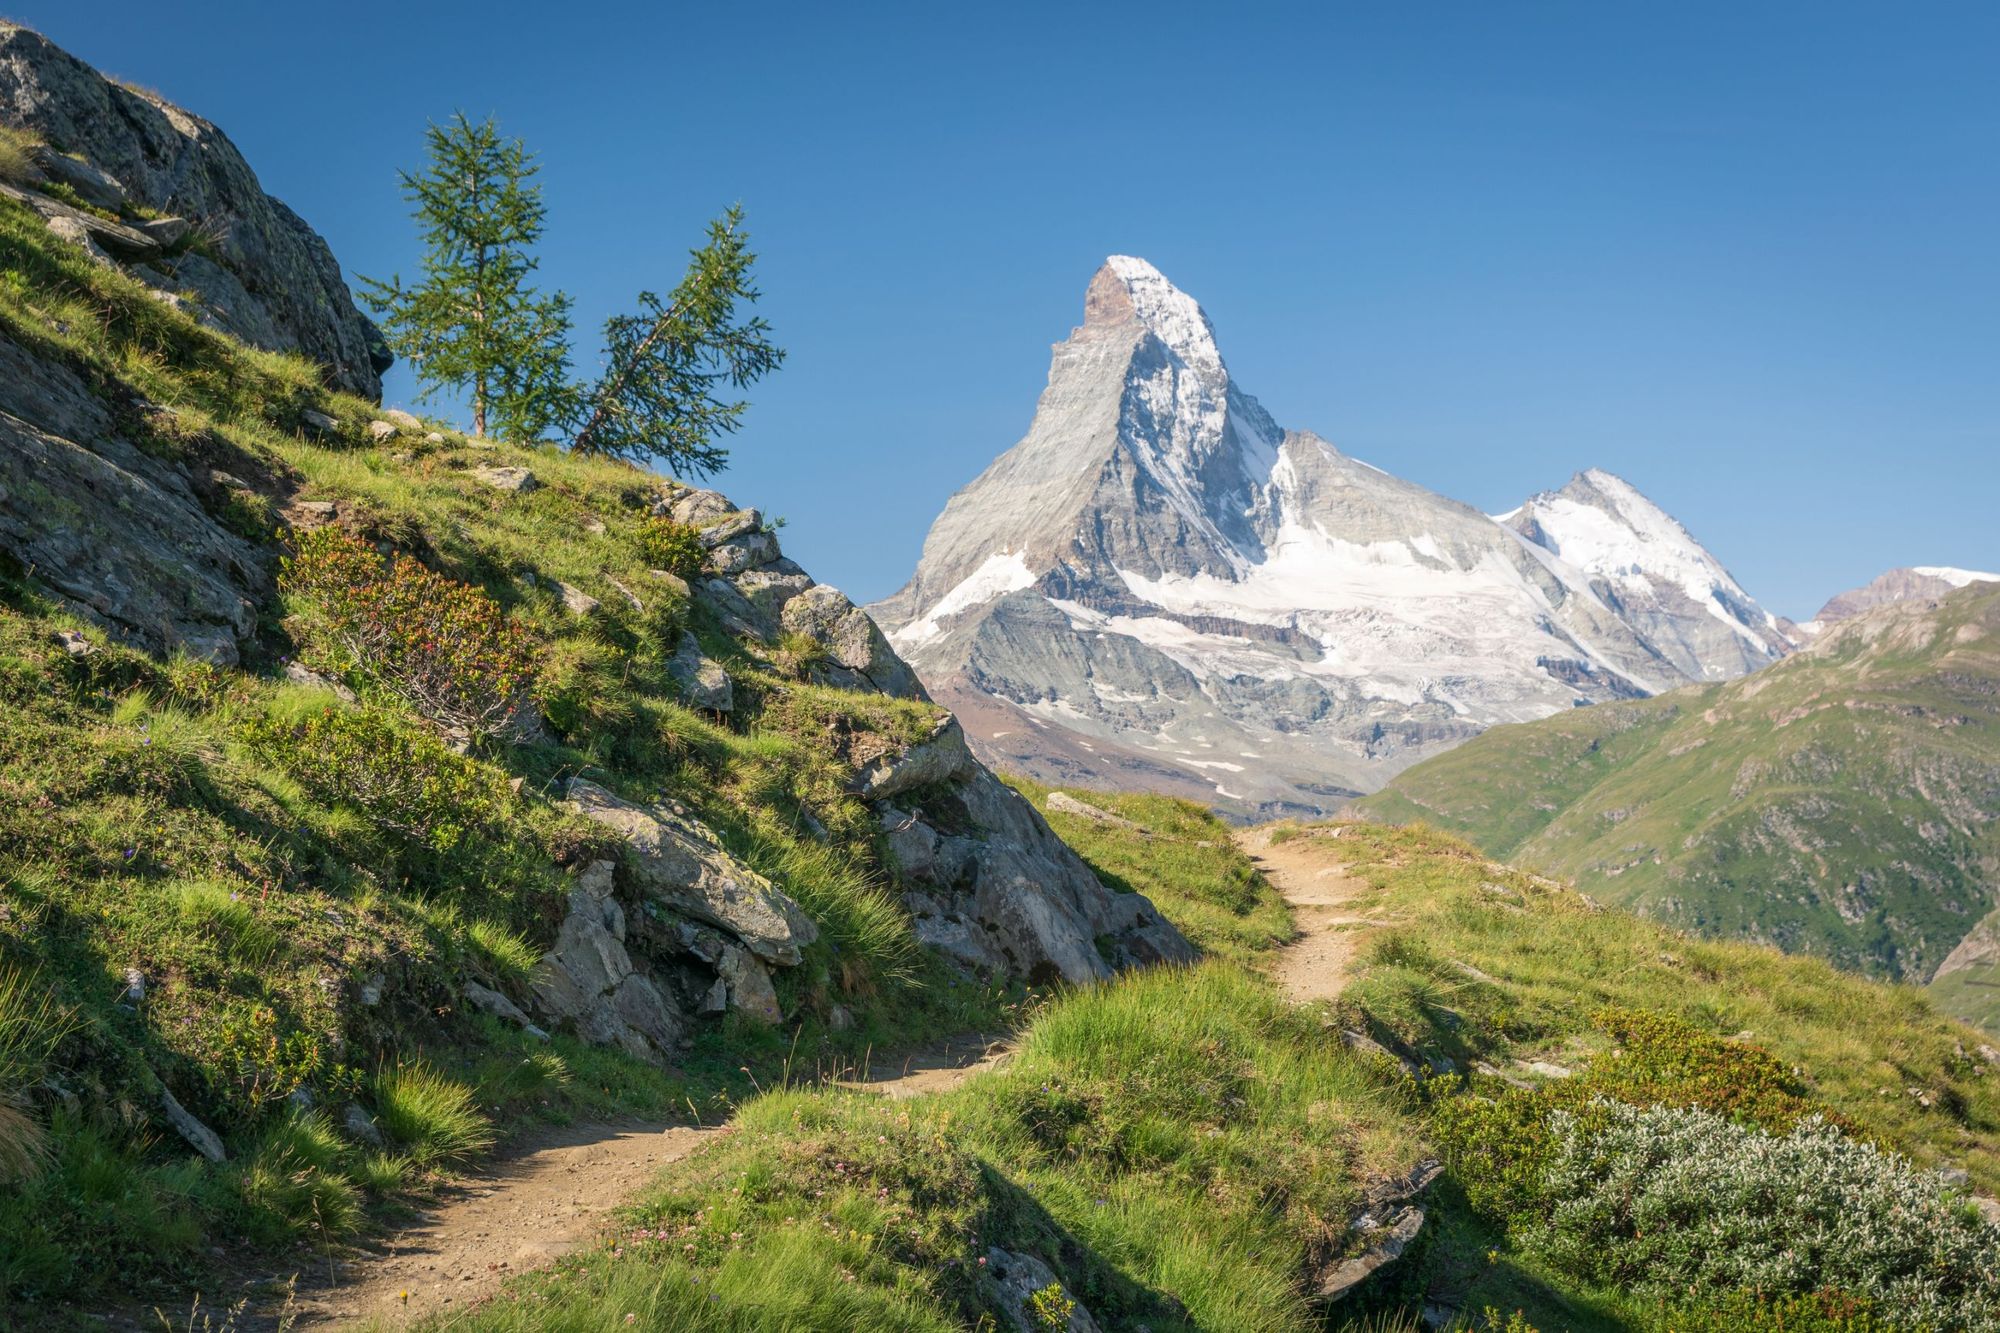 The Circuit: A Guide to the 150km Tour of the Matterhorn